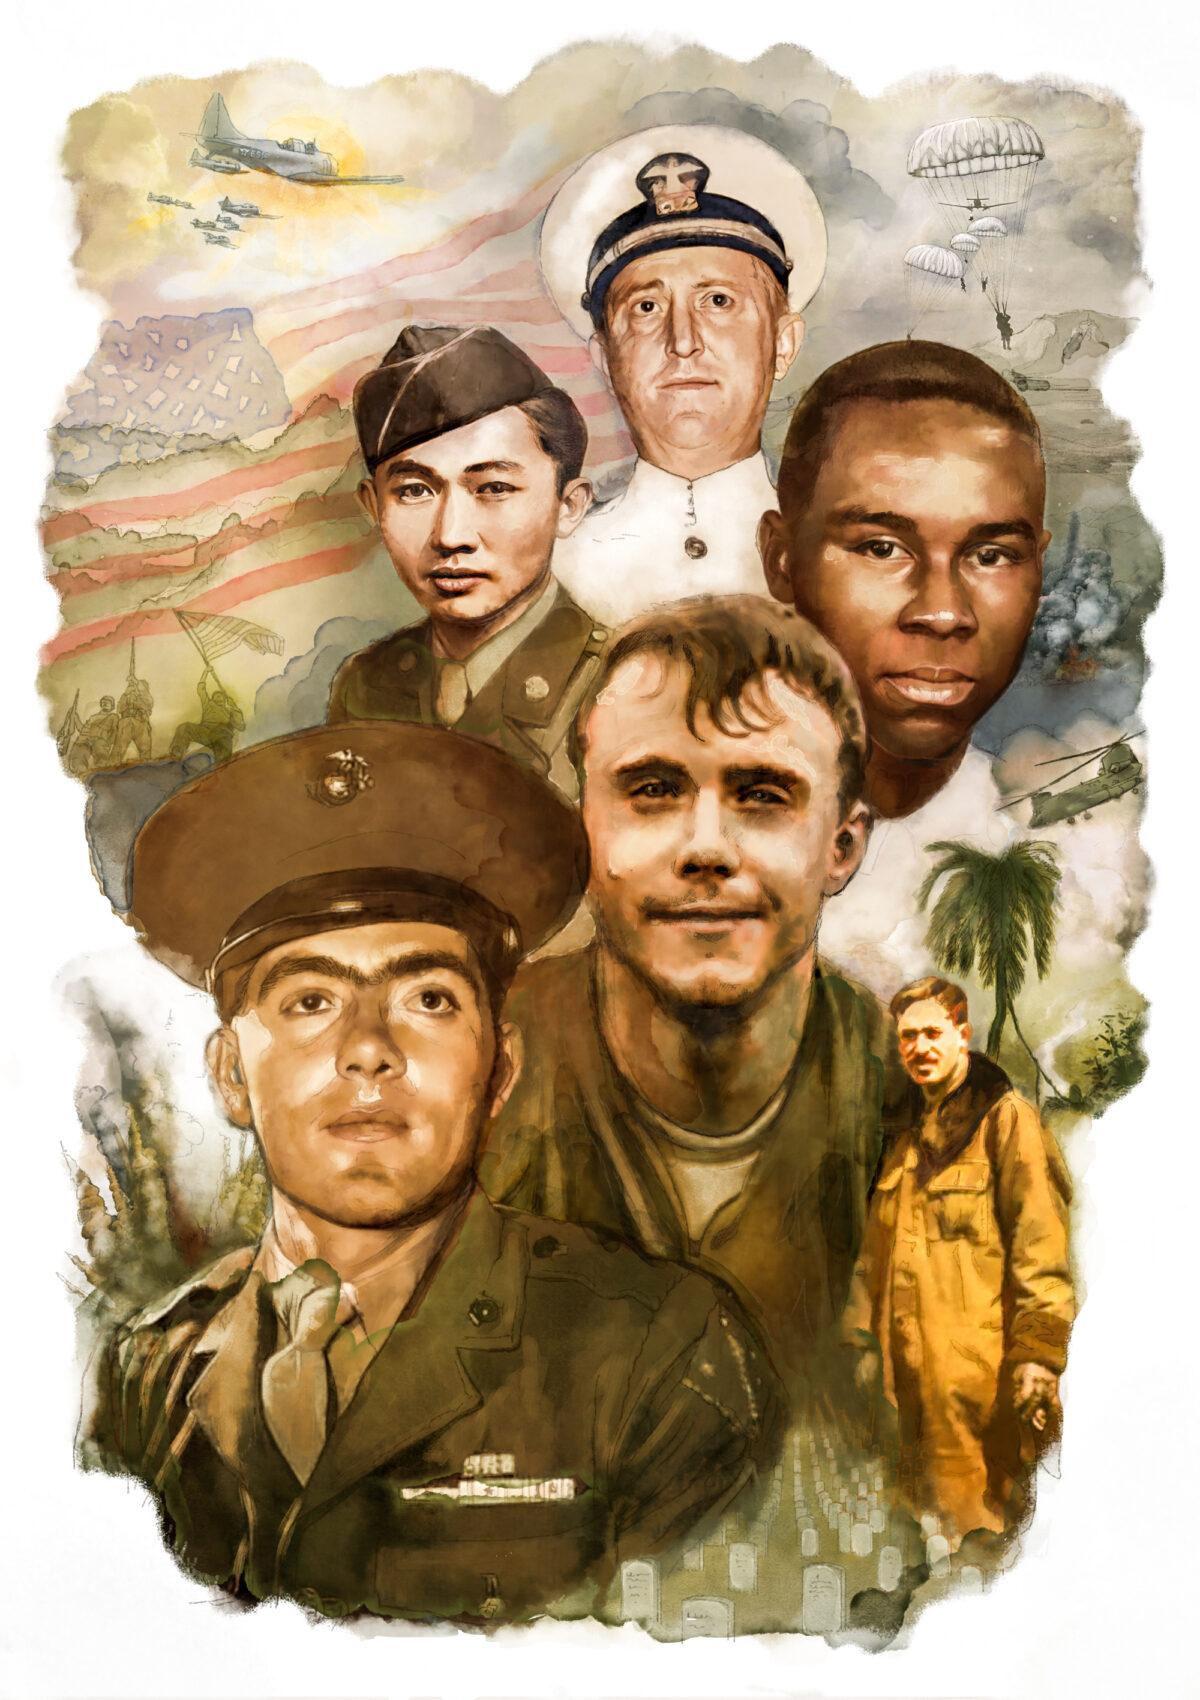 (Top to bottom) Comdr. Howard Gilmore, Pfc. Kiyoshi Muranaga, Pfc. Garfield Langhorne, Staff Sgt. Robert Miller, and Sgt. John Basilone are some of the brave men who received the Medal of Honor. (Bottom R) World War I aviator Kiffin Yates Rockwell was posthumously awarded the Cross of the Legion of Honor. (Biba Kajevic)